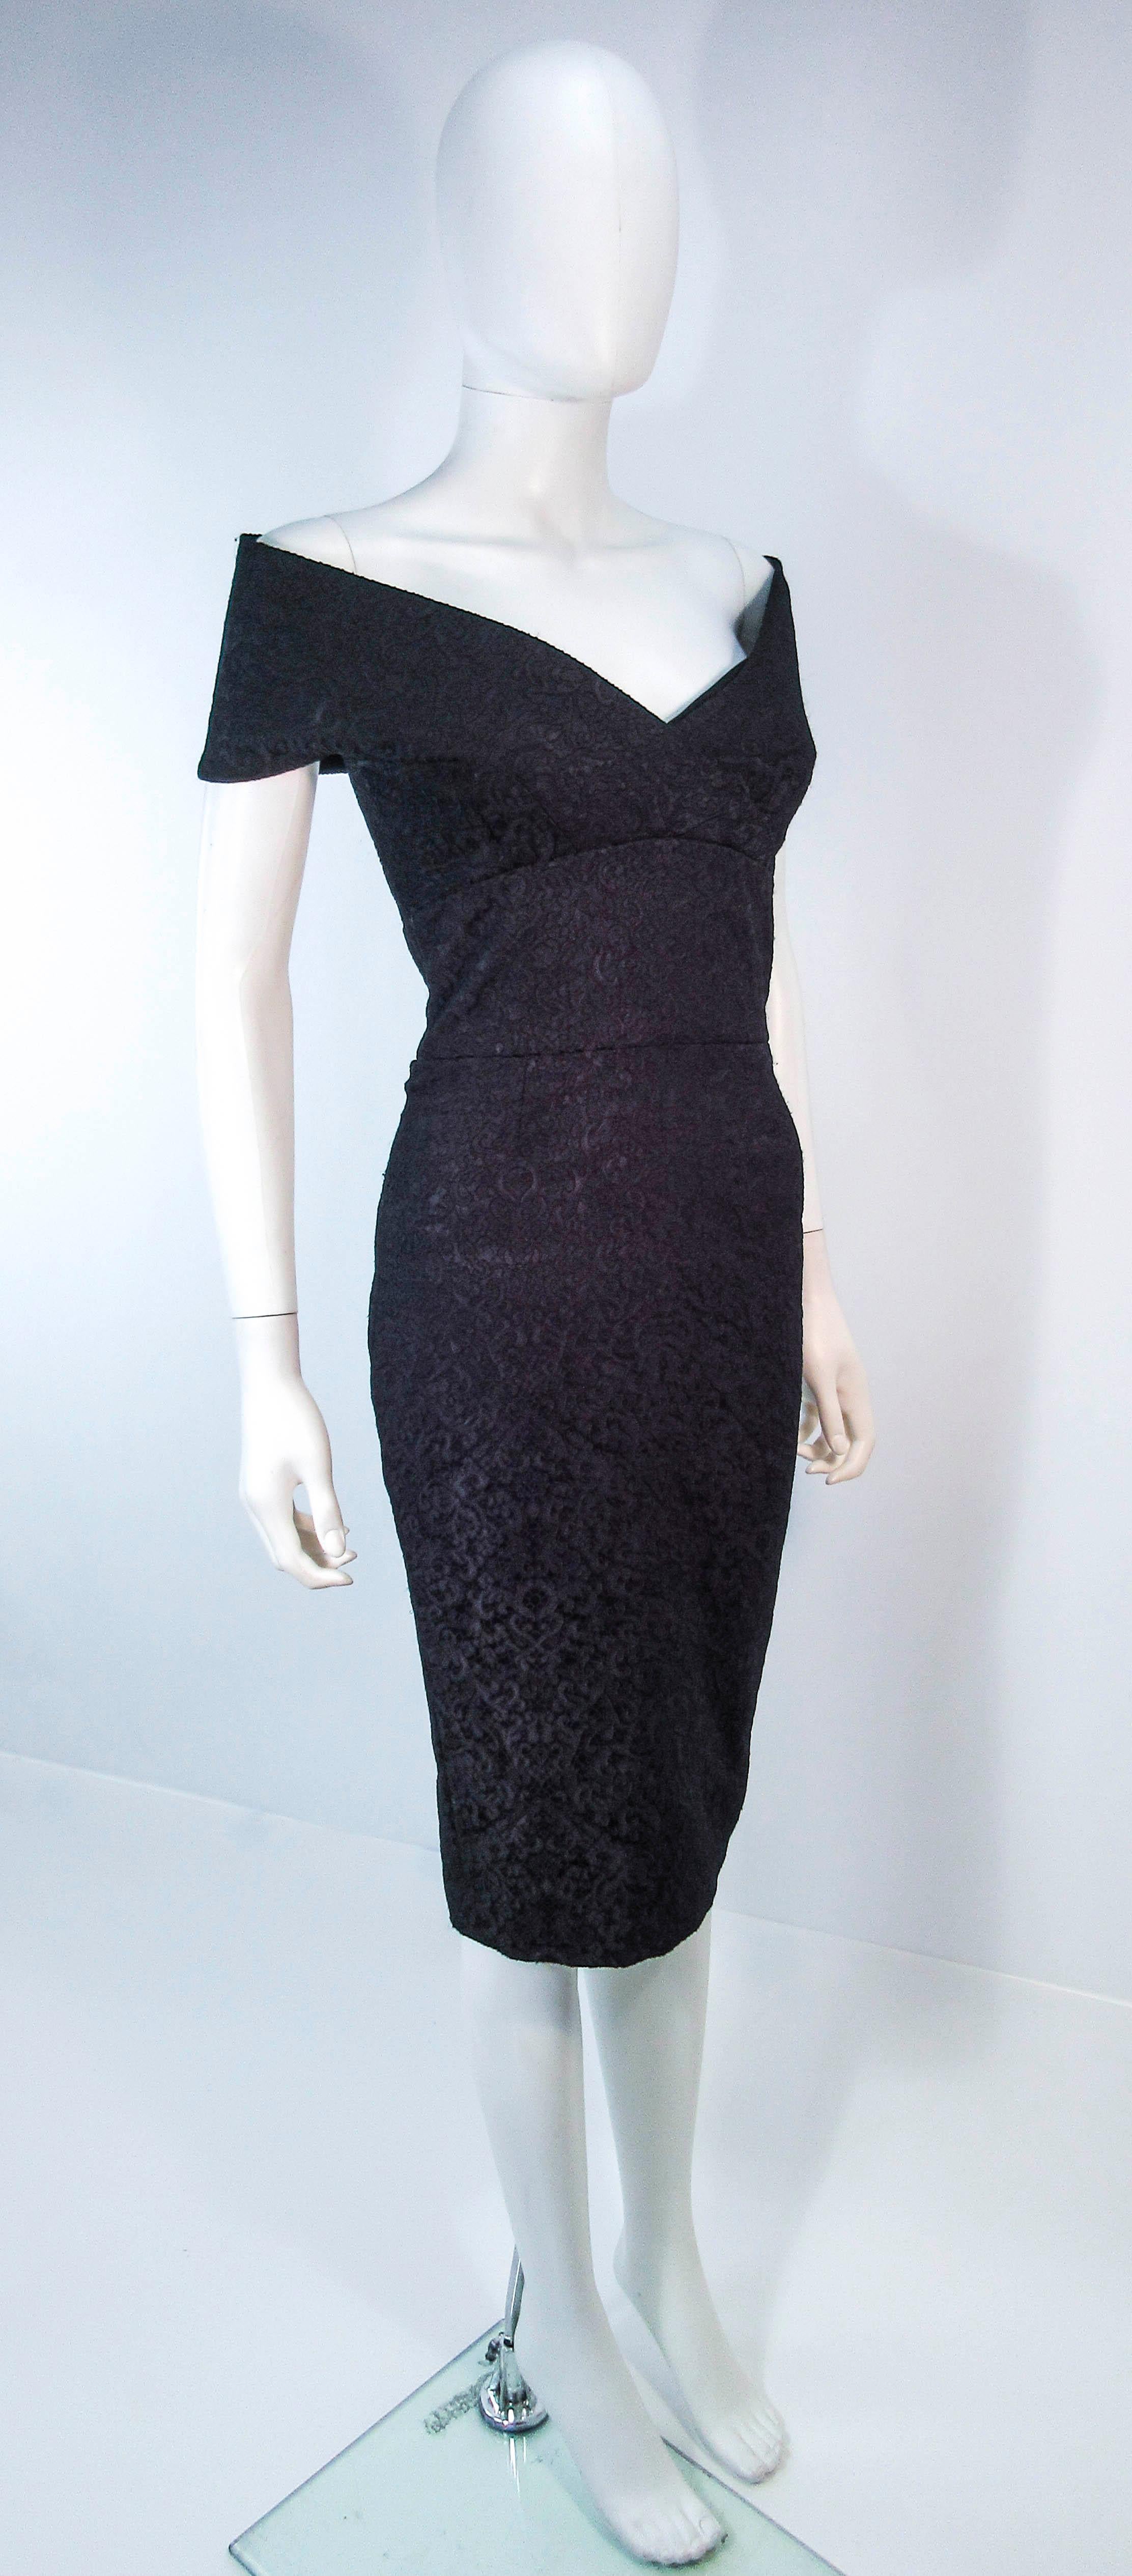 Women's ELIZABETH MASON COUTURE 'MARIA' Black Stretch Lace Cocktail Dress Made to Order For Sale